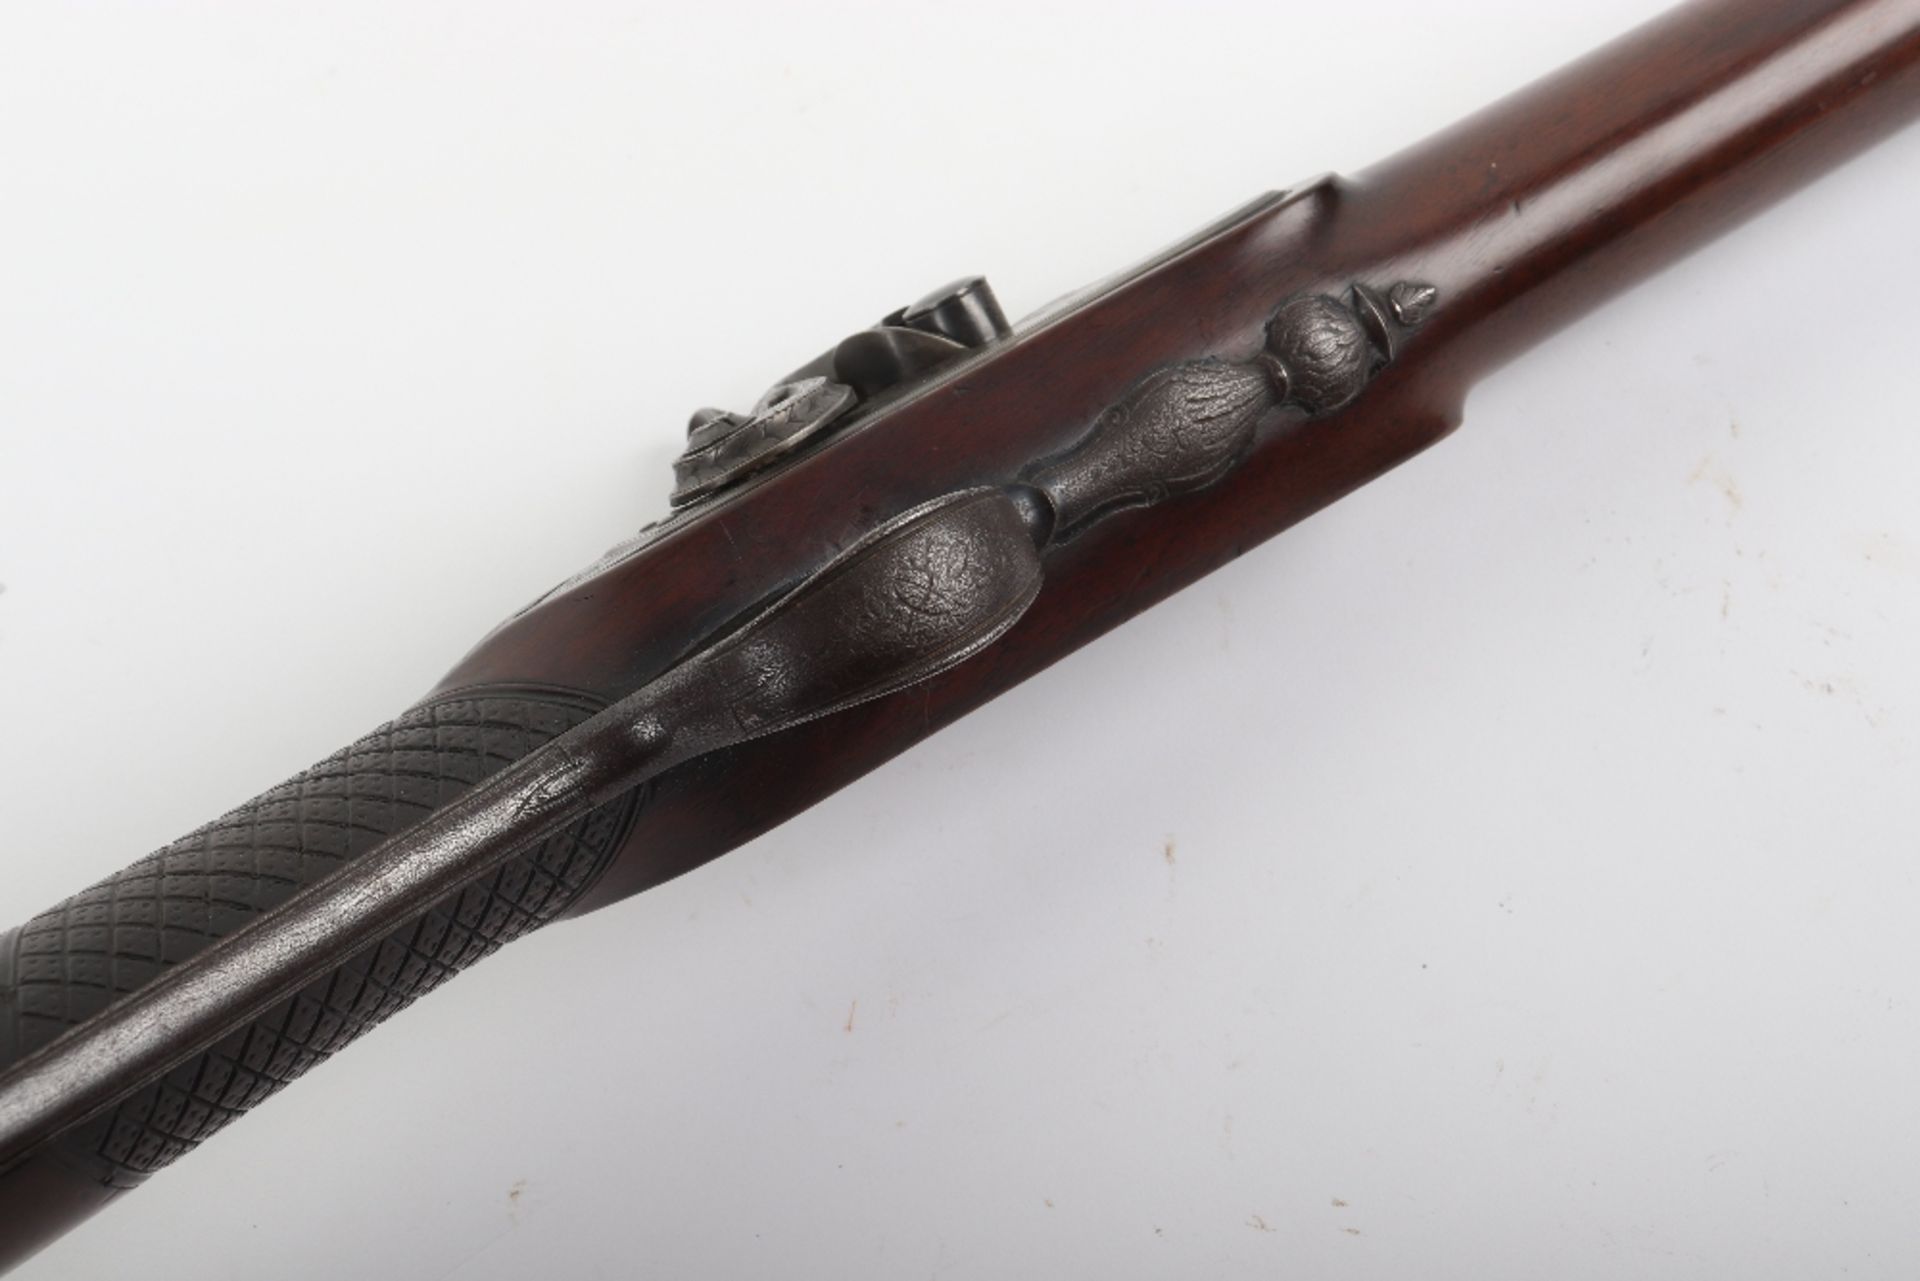 16-Bore Percussion Sporting Gun by D. Egg, Late 18th Century - Image 8 of 15